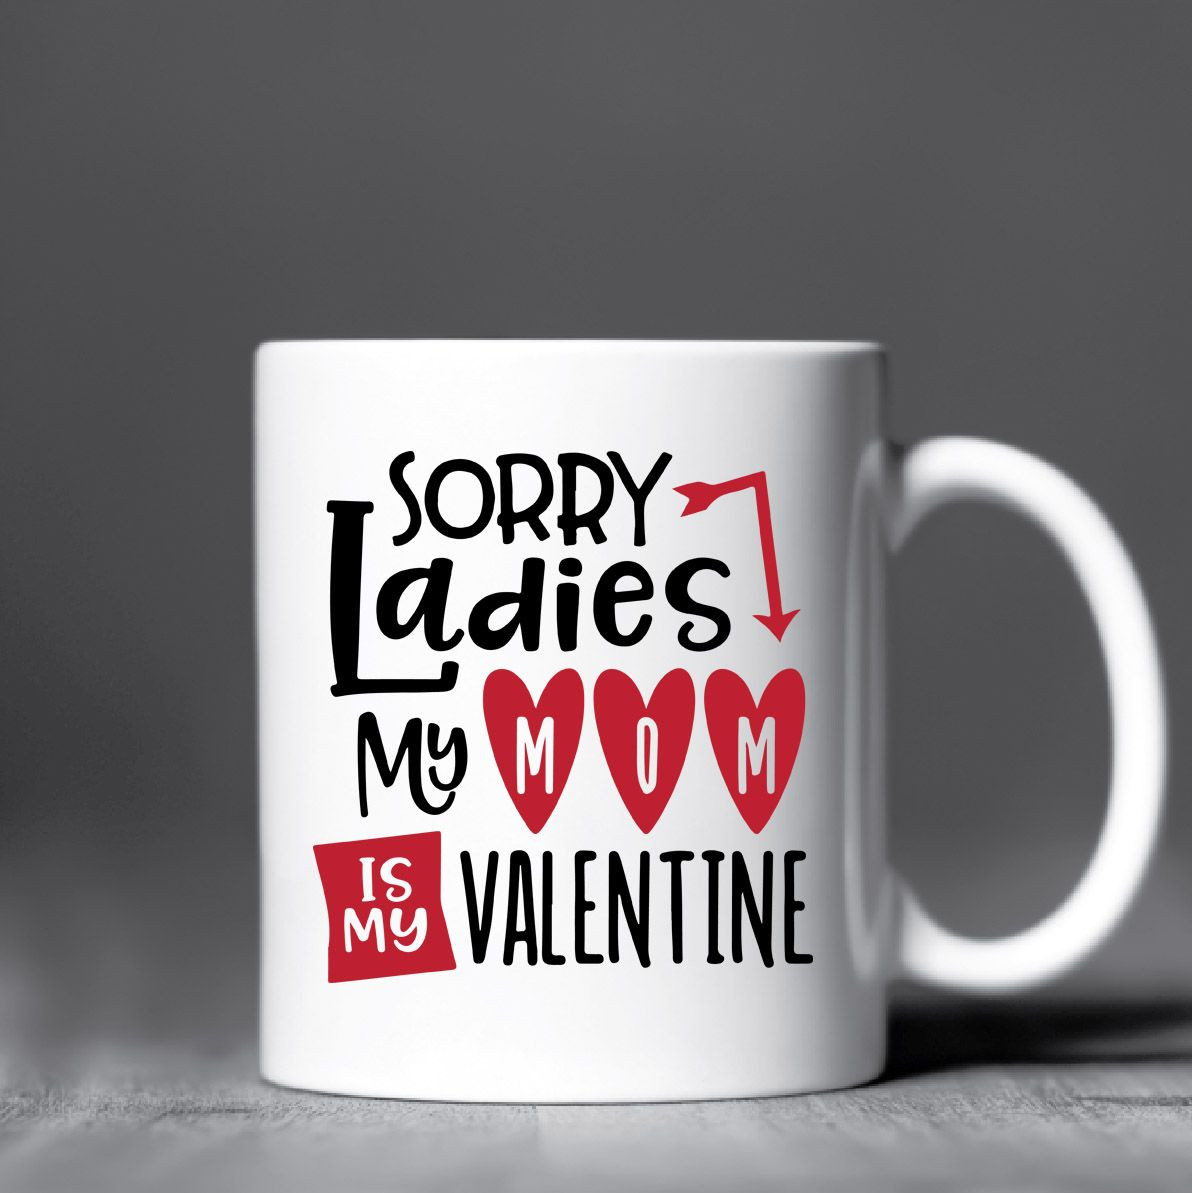 Valentine Day Gift Ideas For Mom
 SORRY LADIES MY MOM IS MY VALENTINE mothers day ts